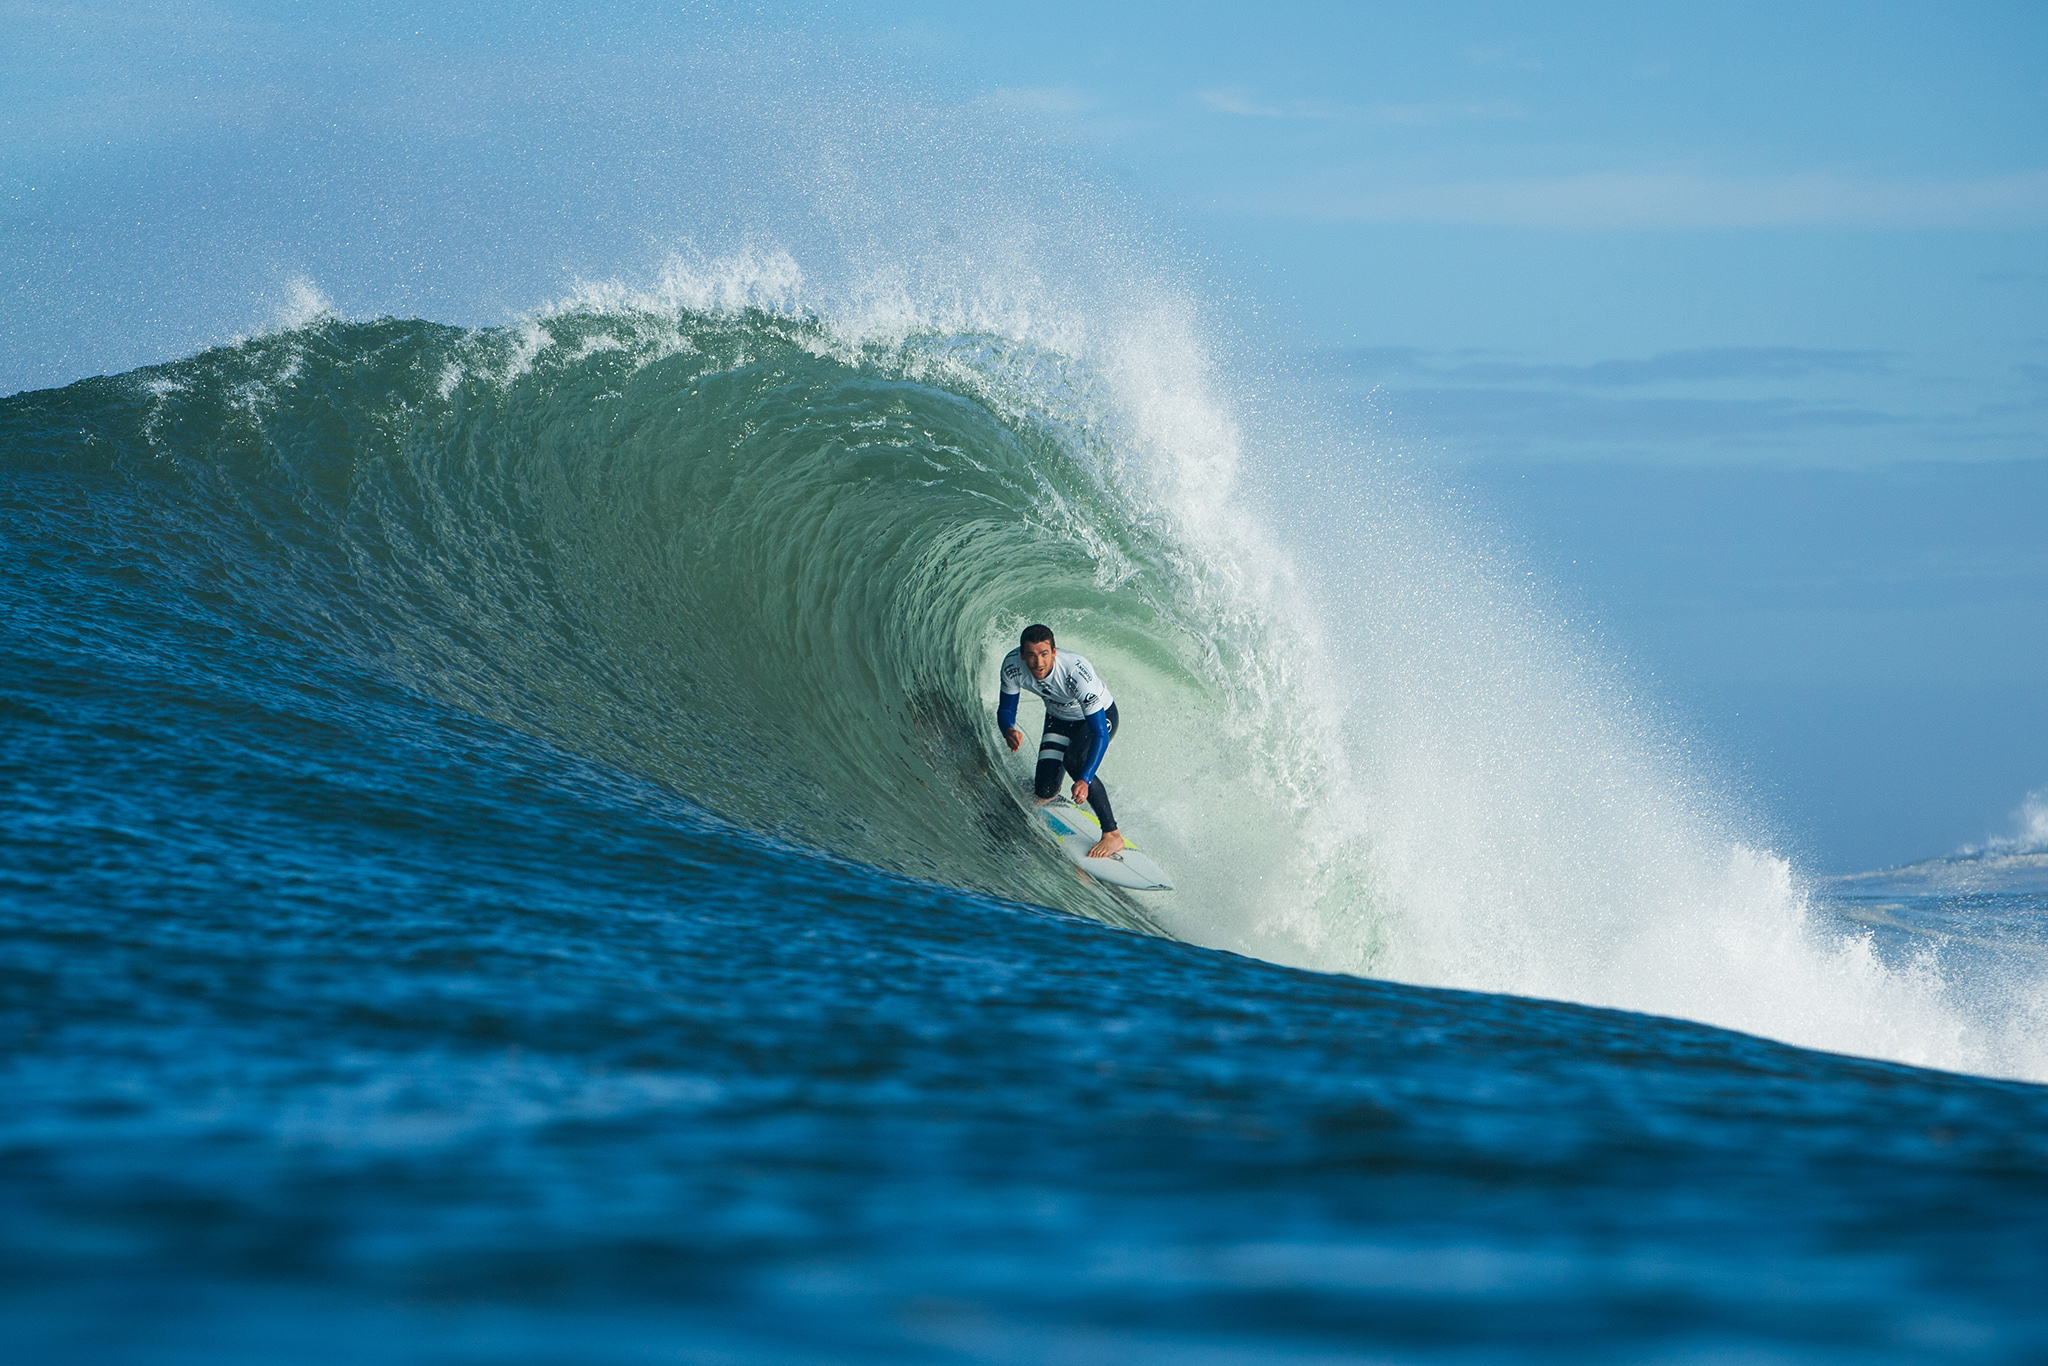 Brett Simpson of the USA (pictured) winning his Round 1 heat at the QUiksilver Pro France on Thursday October 8, 2015.